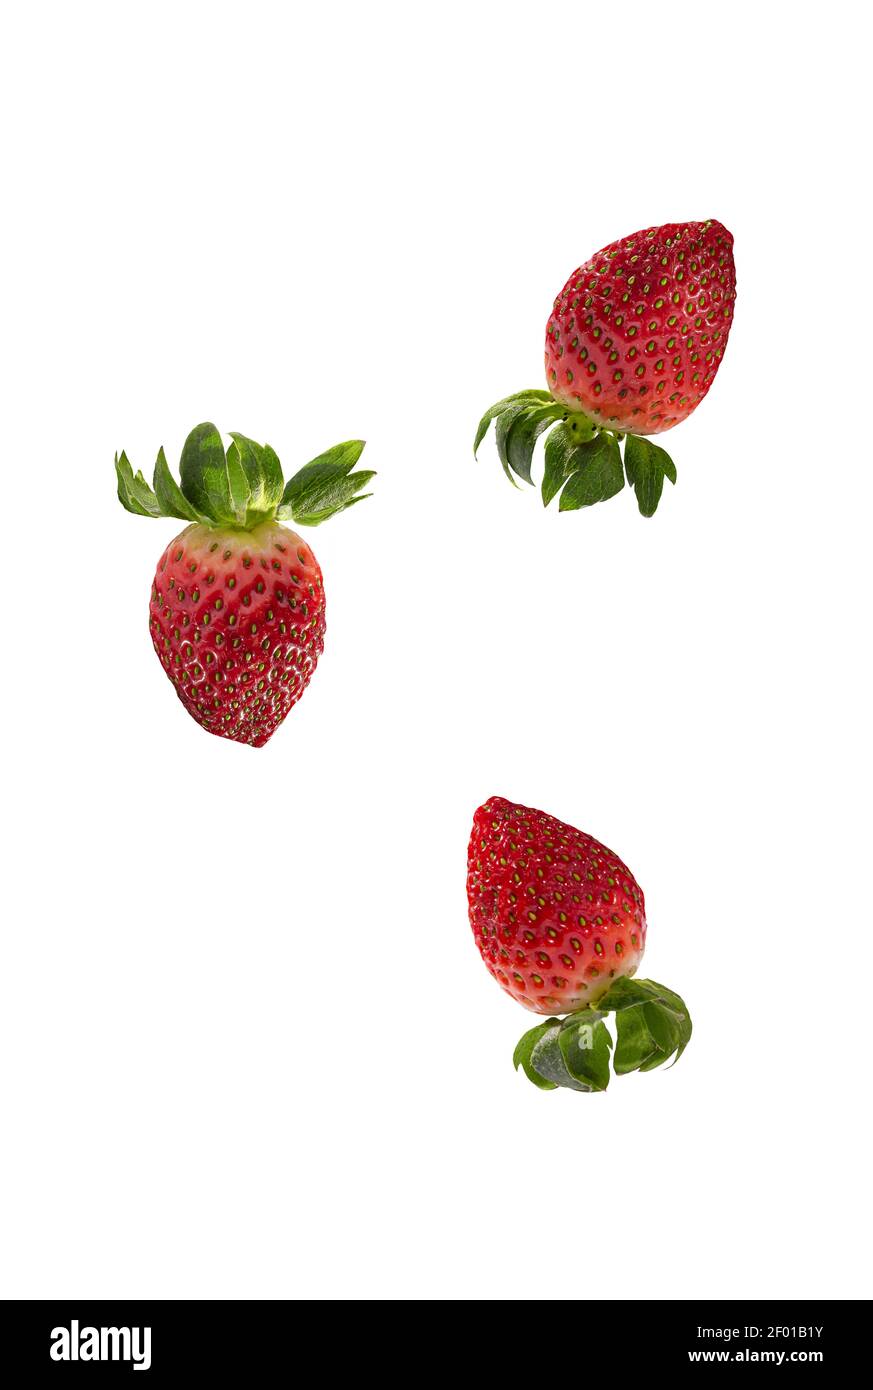 Three whole fresh beautiful red strawberries isolated on white background. Vertical orientation. Copy space. Stock Photo